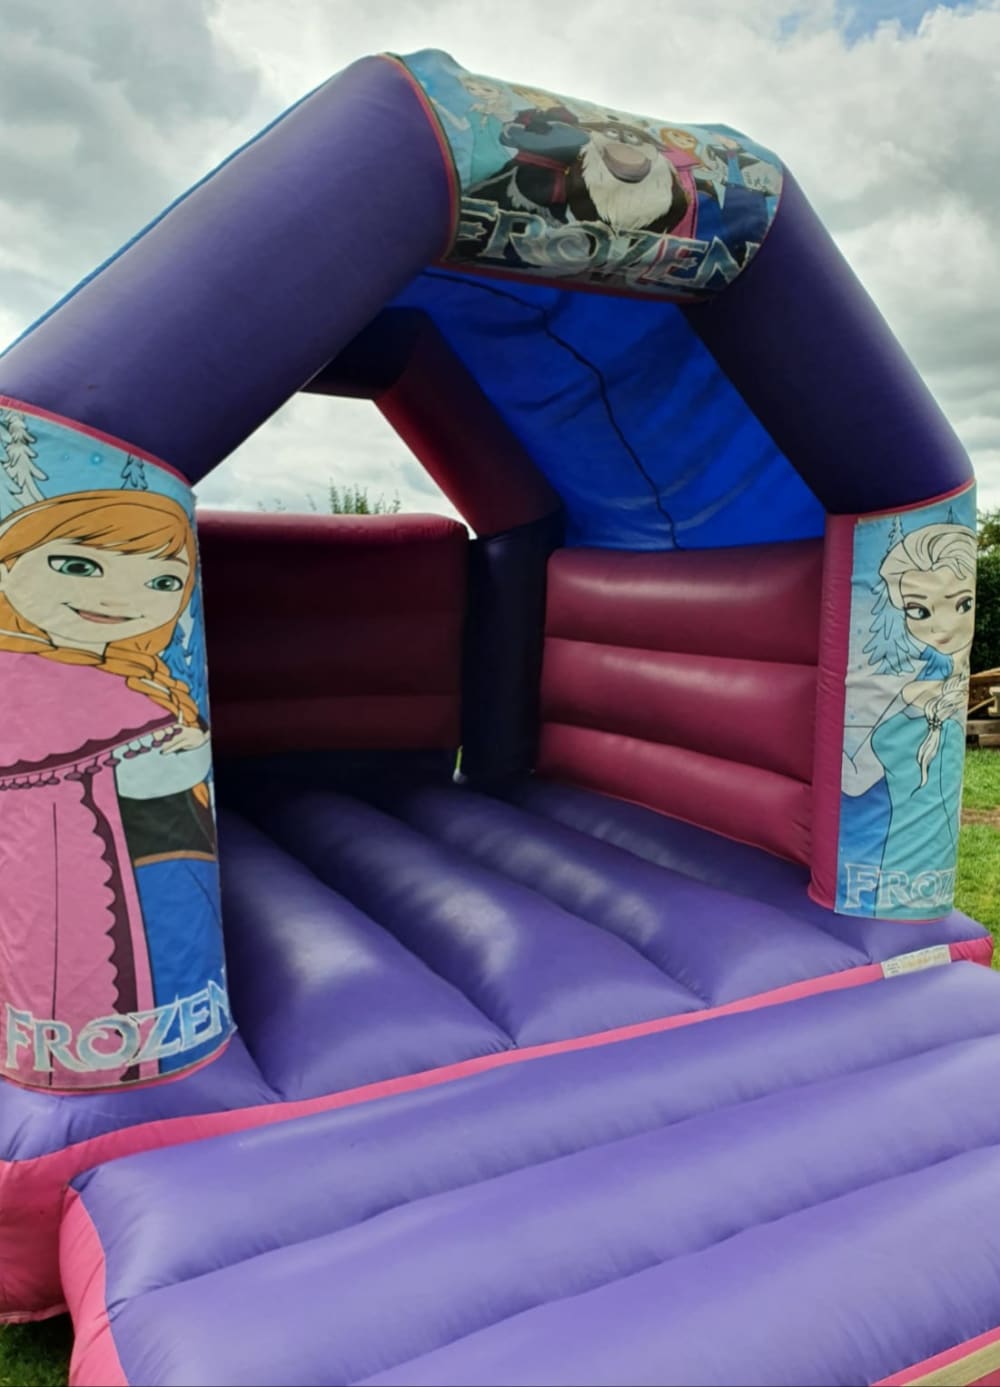 Bouncy Castles Bouncy Castles Inflatables Hire And Childrens Party Packages In Lichfield Tamworth Rugeley Burton On Trent Cannock Staffordshire